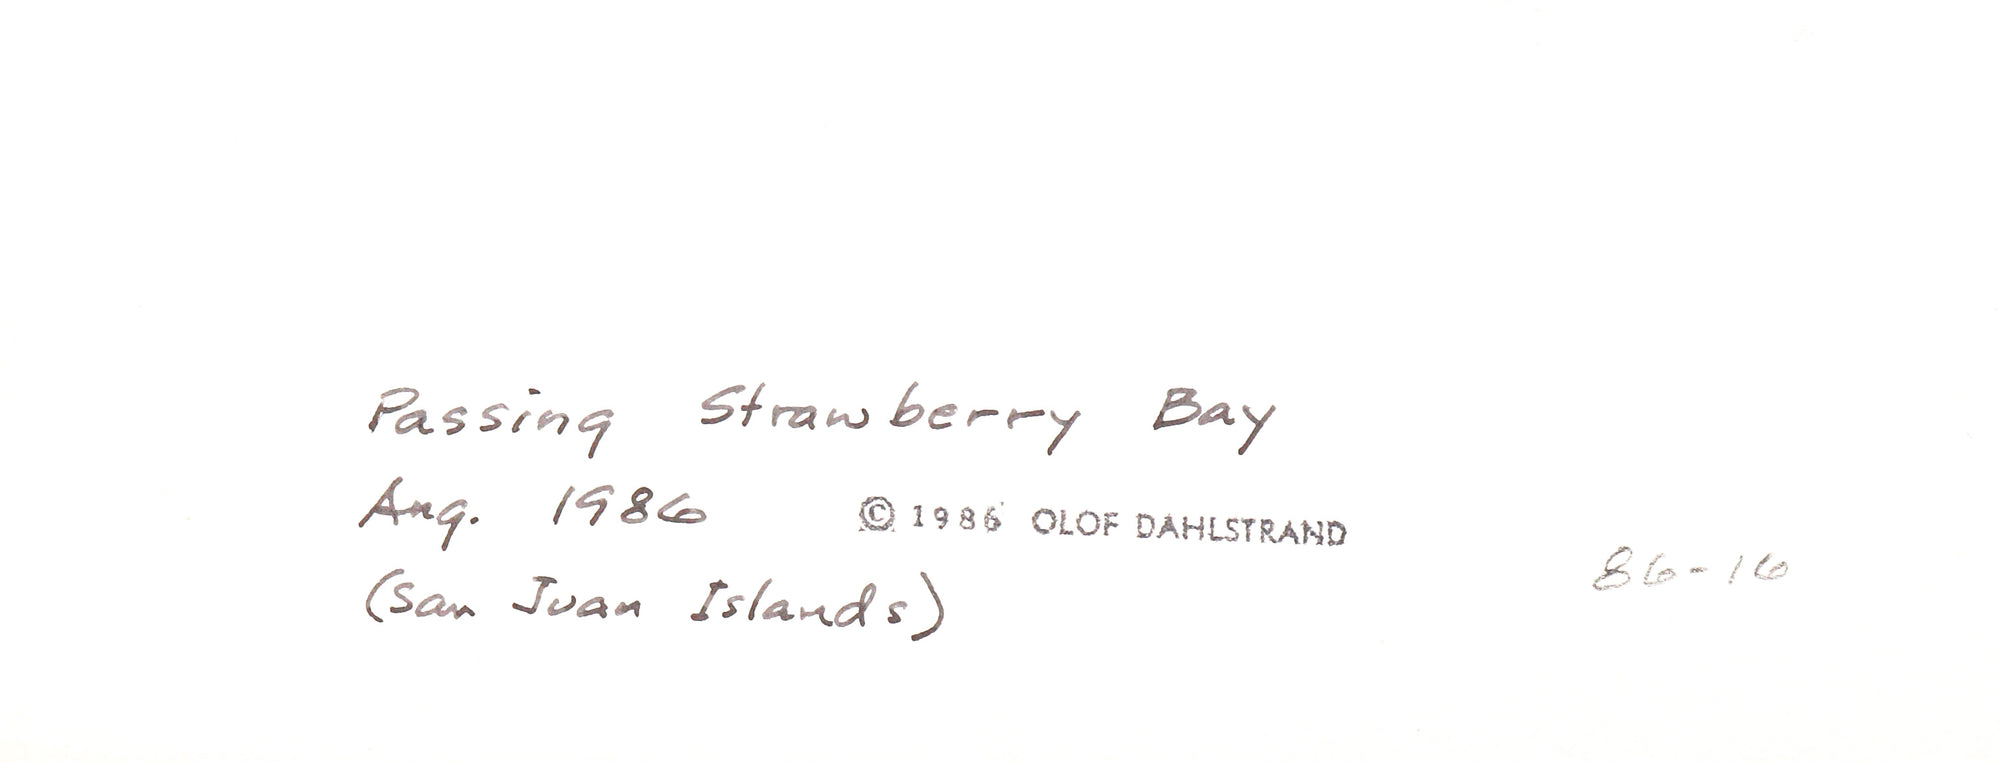 <i>Passing Strawberry Bay</i><br>1986 August<br><br>#C3167